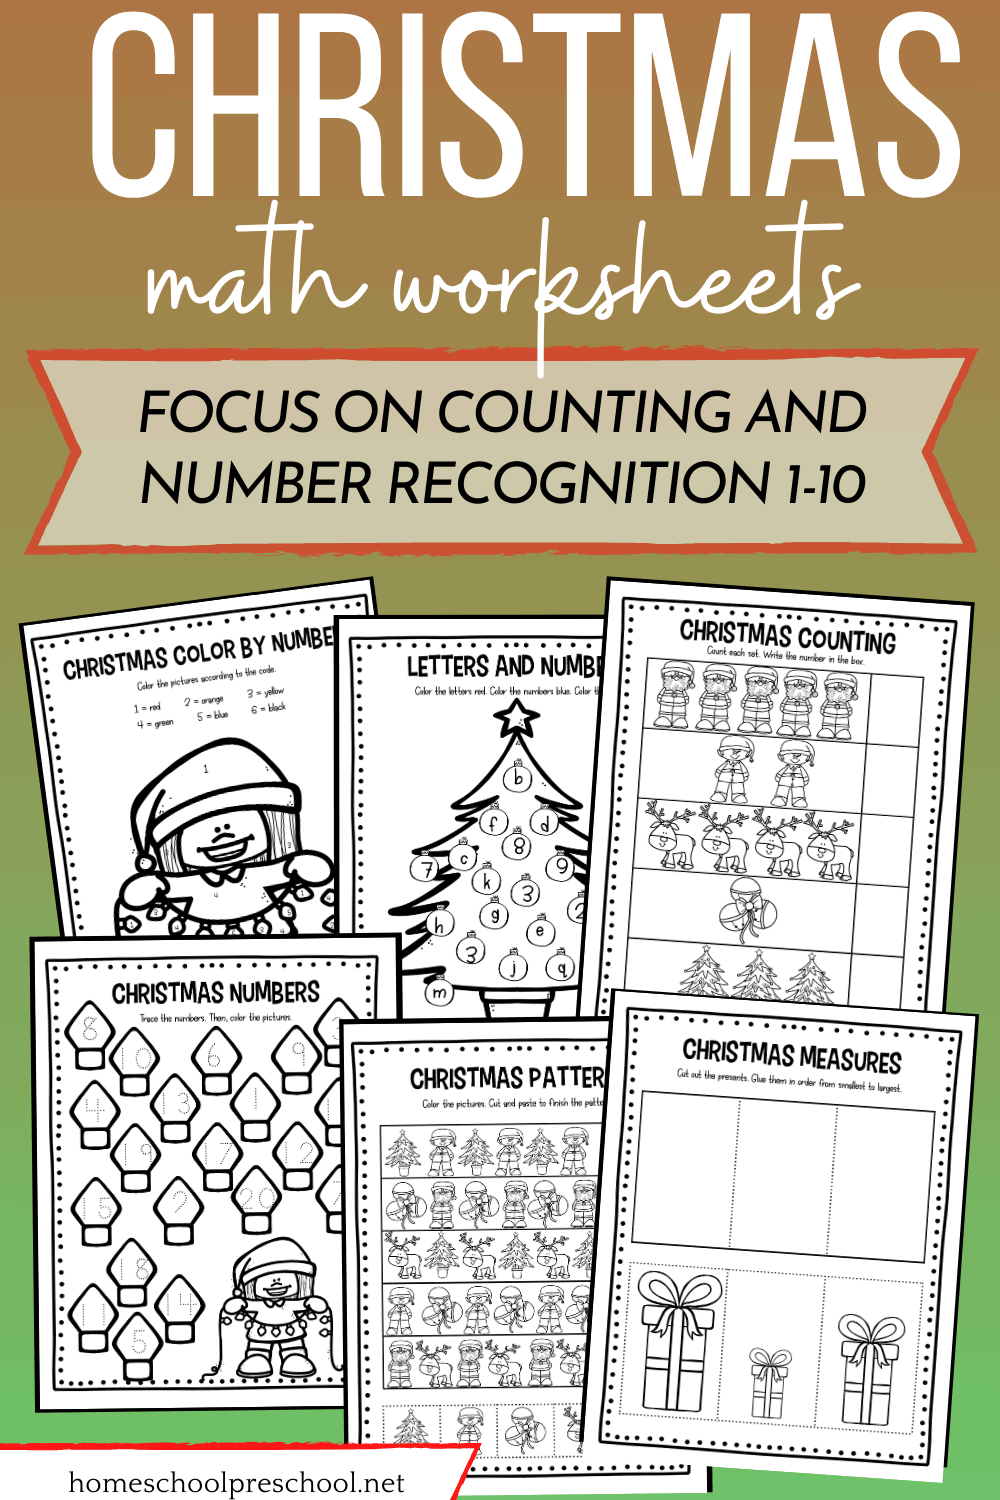 free-christmas-math-worksheets-for-preschoolers